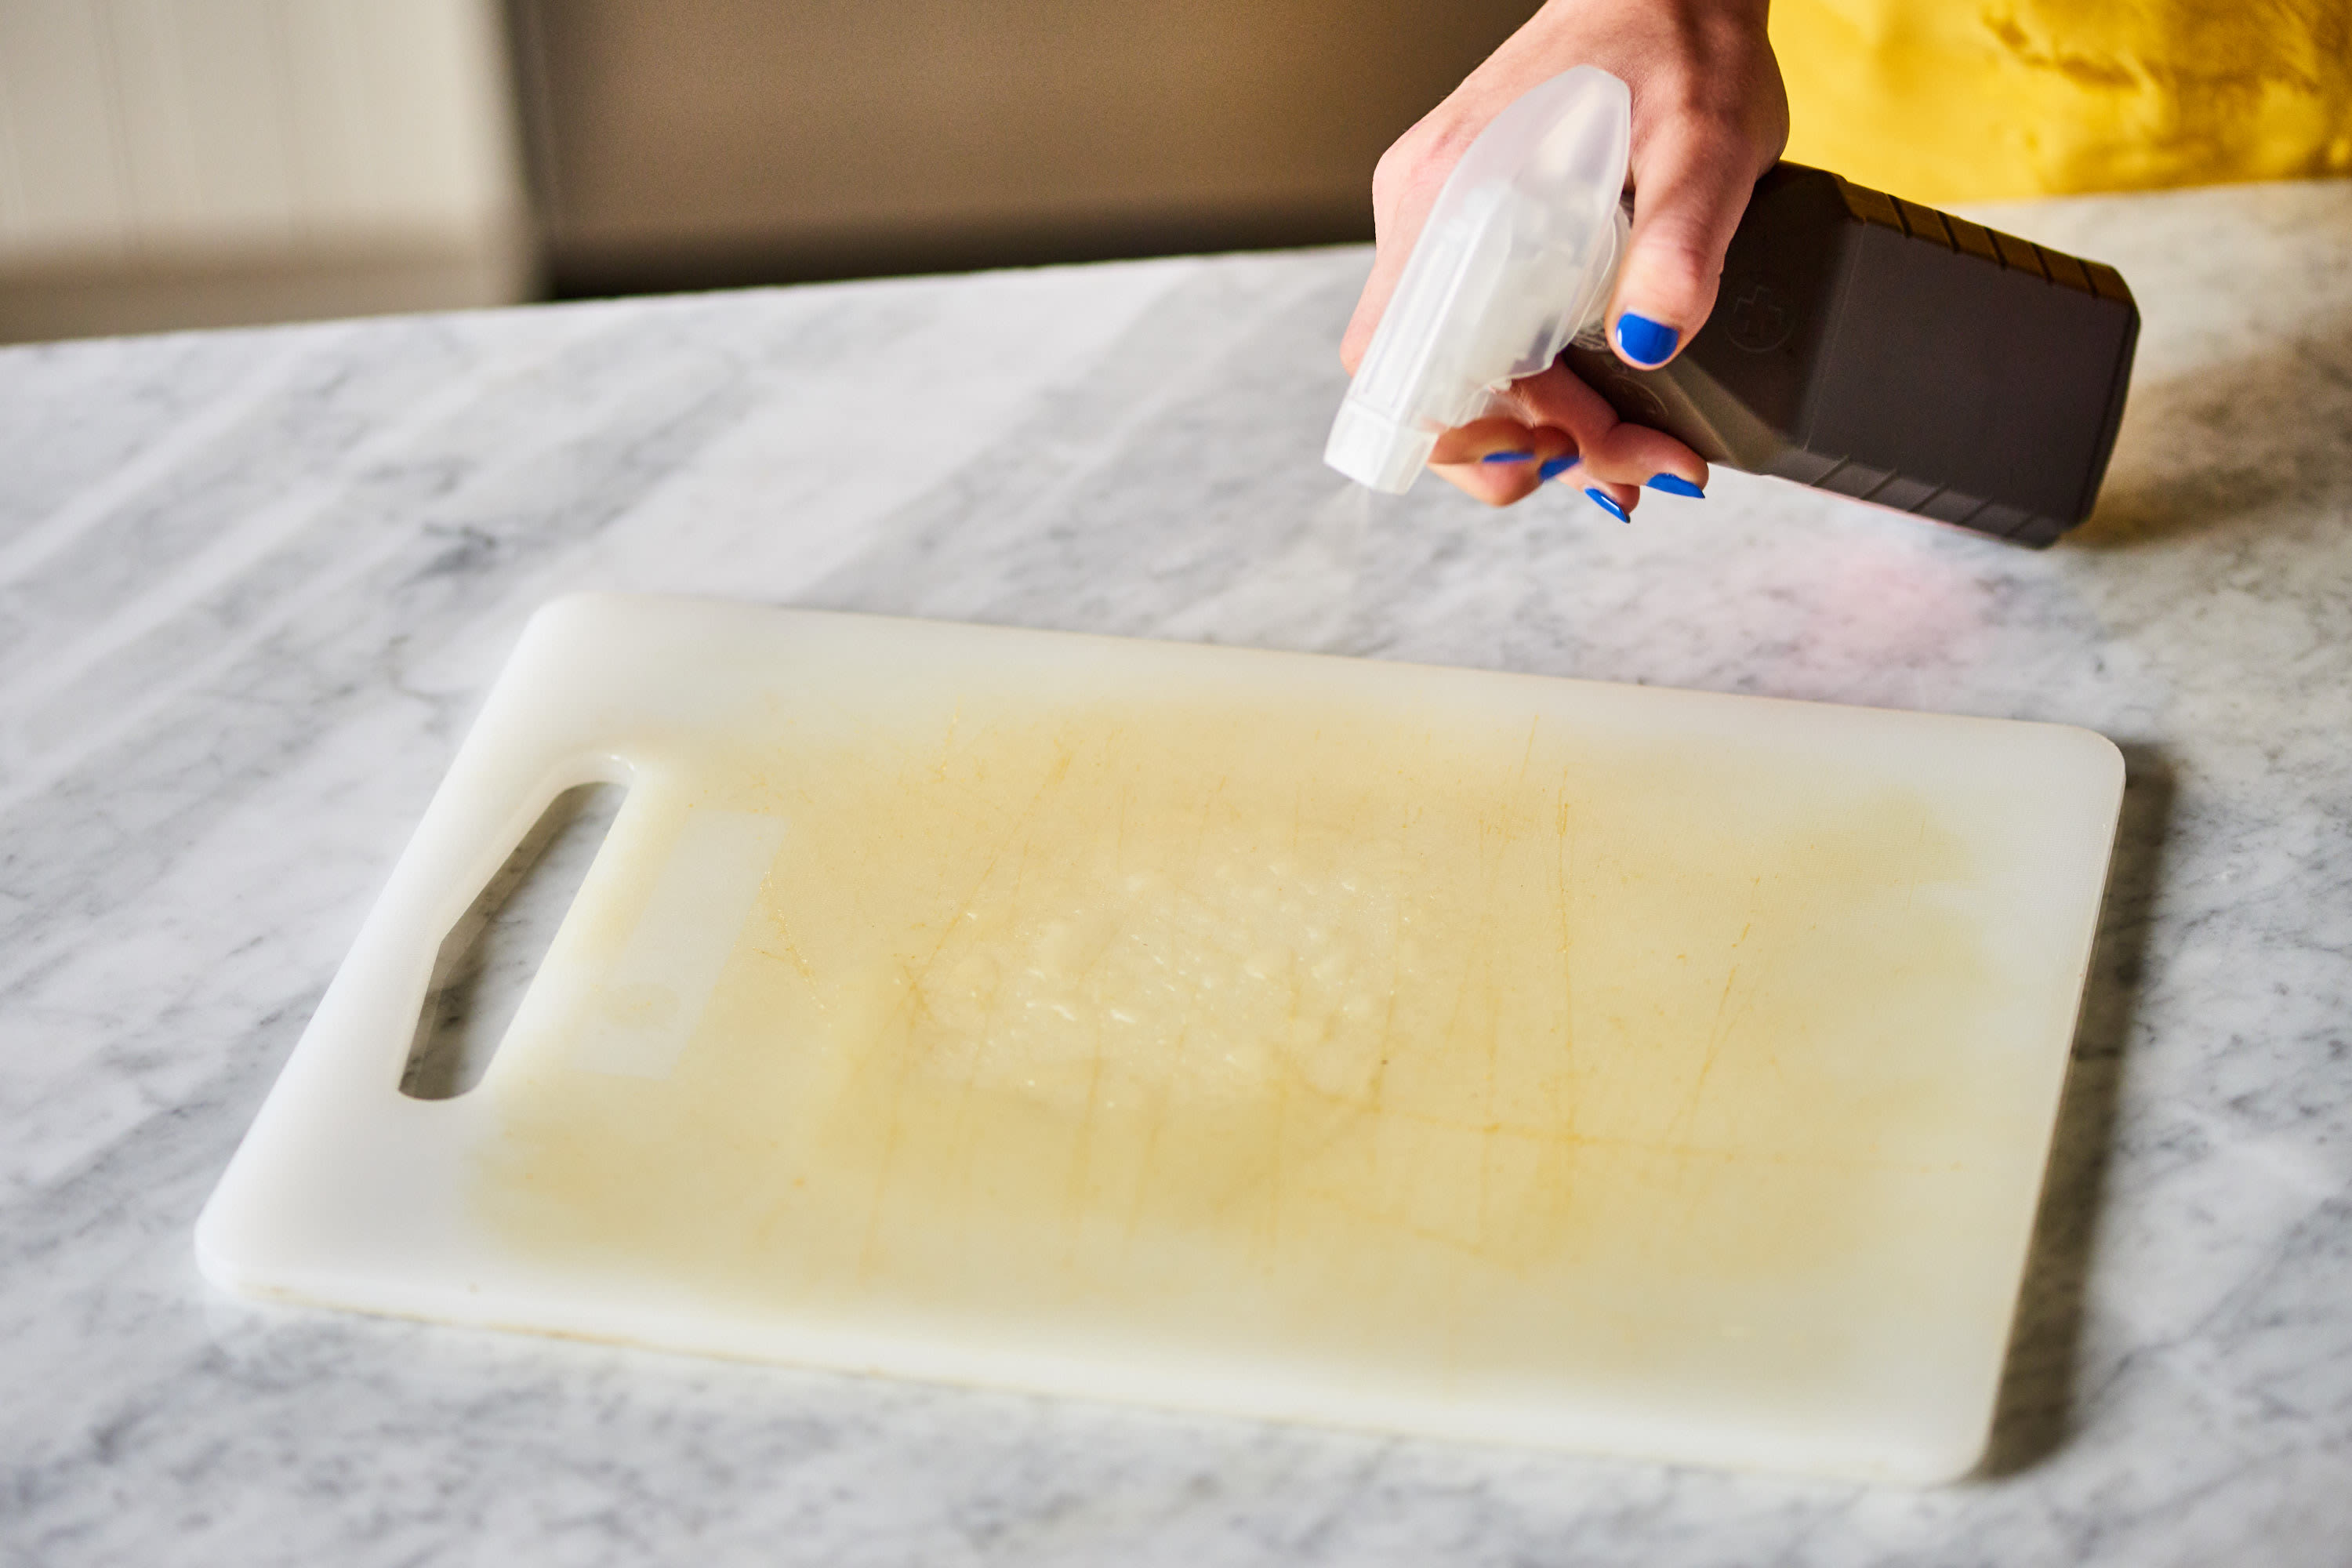 https://cdn.apartmenttherapy.info/image/upload/v1565638184/k/Photo/Lifestyle/2019-08-how-to-clean-plastic-cutting-boards/How-to-Clean-Plastic-Cutting-Boards-Without-Bleach_035.jpg